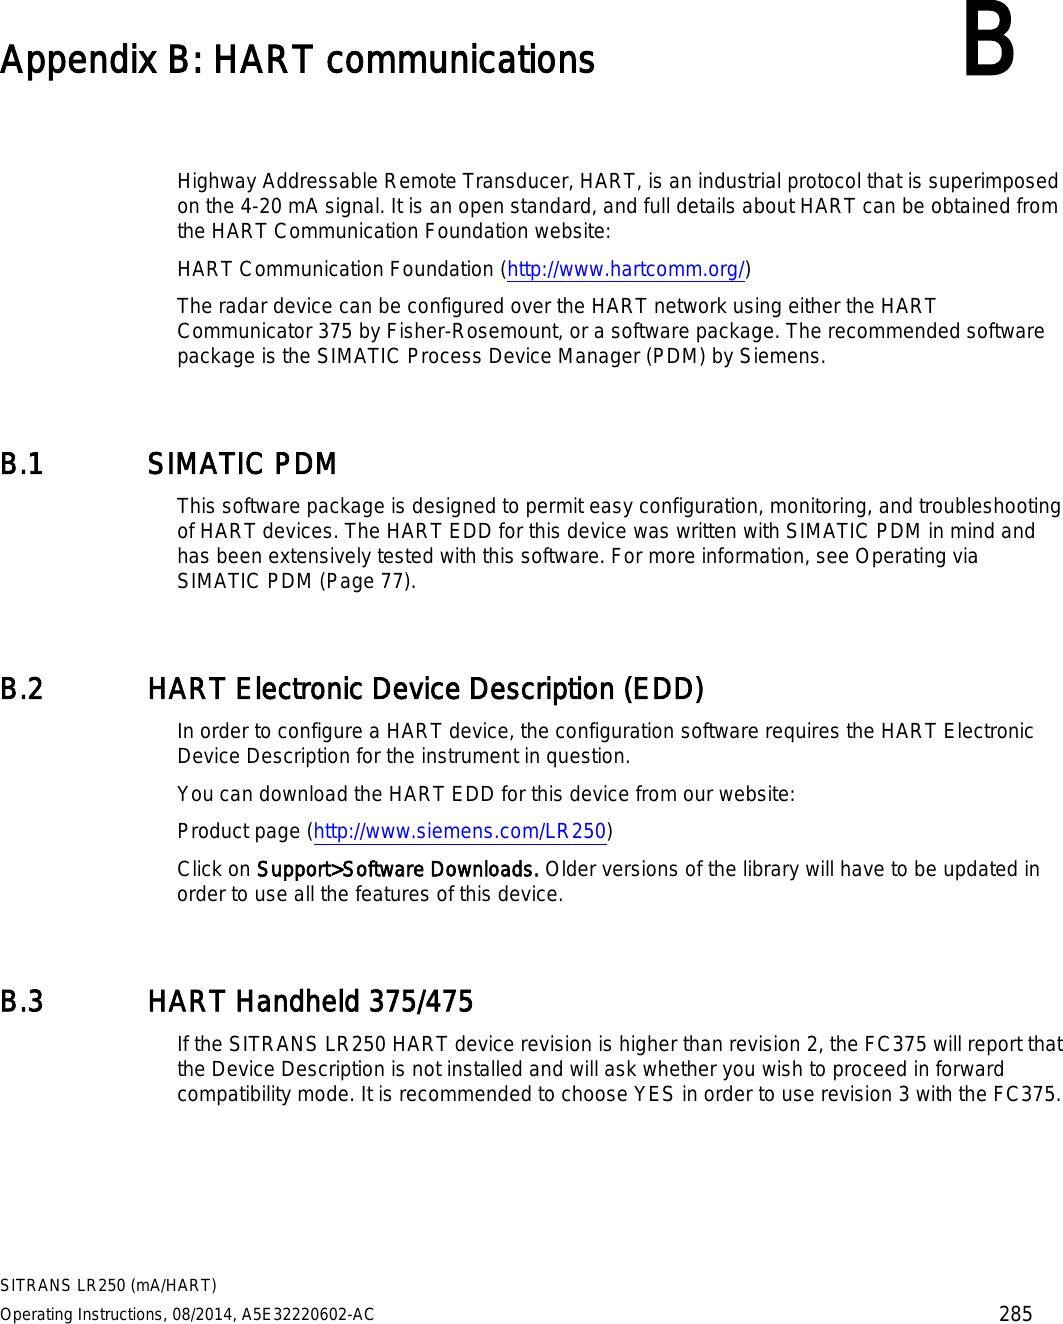  SITRANS LR250 (mA/HART) Operating Instructions, 08/2014, A5E32220602-AC 285  Appendix B: HART communications B  Highway Addressable Remote Transducer, HART, is an industrial protocol that is superimposed on the 4-20 mA signal. It is an open standard, and full details about HART can be obtained from the HART Communication Foundation website: HART Communication Foundation (http://www.hartcomm.org/)  The radar device can be configured over the HART network using either the HART Communicator 375 by Fisher-Rosemount, or a software package. The recommended software package is the SIMATIC Process Device Manager (PDM) by Siemens. B.1 SIMATIC PDM This software package is designed to permit easy configuration, monitoring, and troubleshooting of HART devices. The HART EDD for this device was written with SIMATIC PDM in mind and has been extensively tested with this software. For more information, see Operating via SIMATIC PDM (Page 77). B.2 HART Electronic Device Description (EDD) In order to configure a HART device, the configuration software requires the HART Electronic Device Description for the instrument in question. You can download the HART EDD for this device from our website:  Product page (http://www.siemens.com/LR250) Click on Support&gt;Software Downloads. Older versions of the library will have to be updated in order to use all the features of this device. B.3 HART Handheld 375/475 If the SITRANS LR250 HART device revision is higher than revision 2, the FC375 will report that the Device Description is not installed and will ask whether you wish to proceed in forward compatibility mode. It is recommended to choose YES in order to use revision 3 with the FC375. 